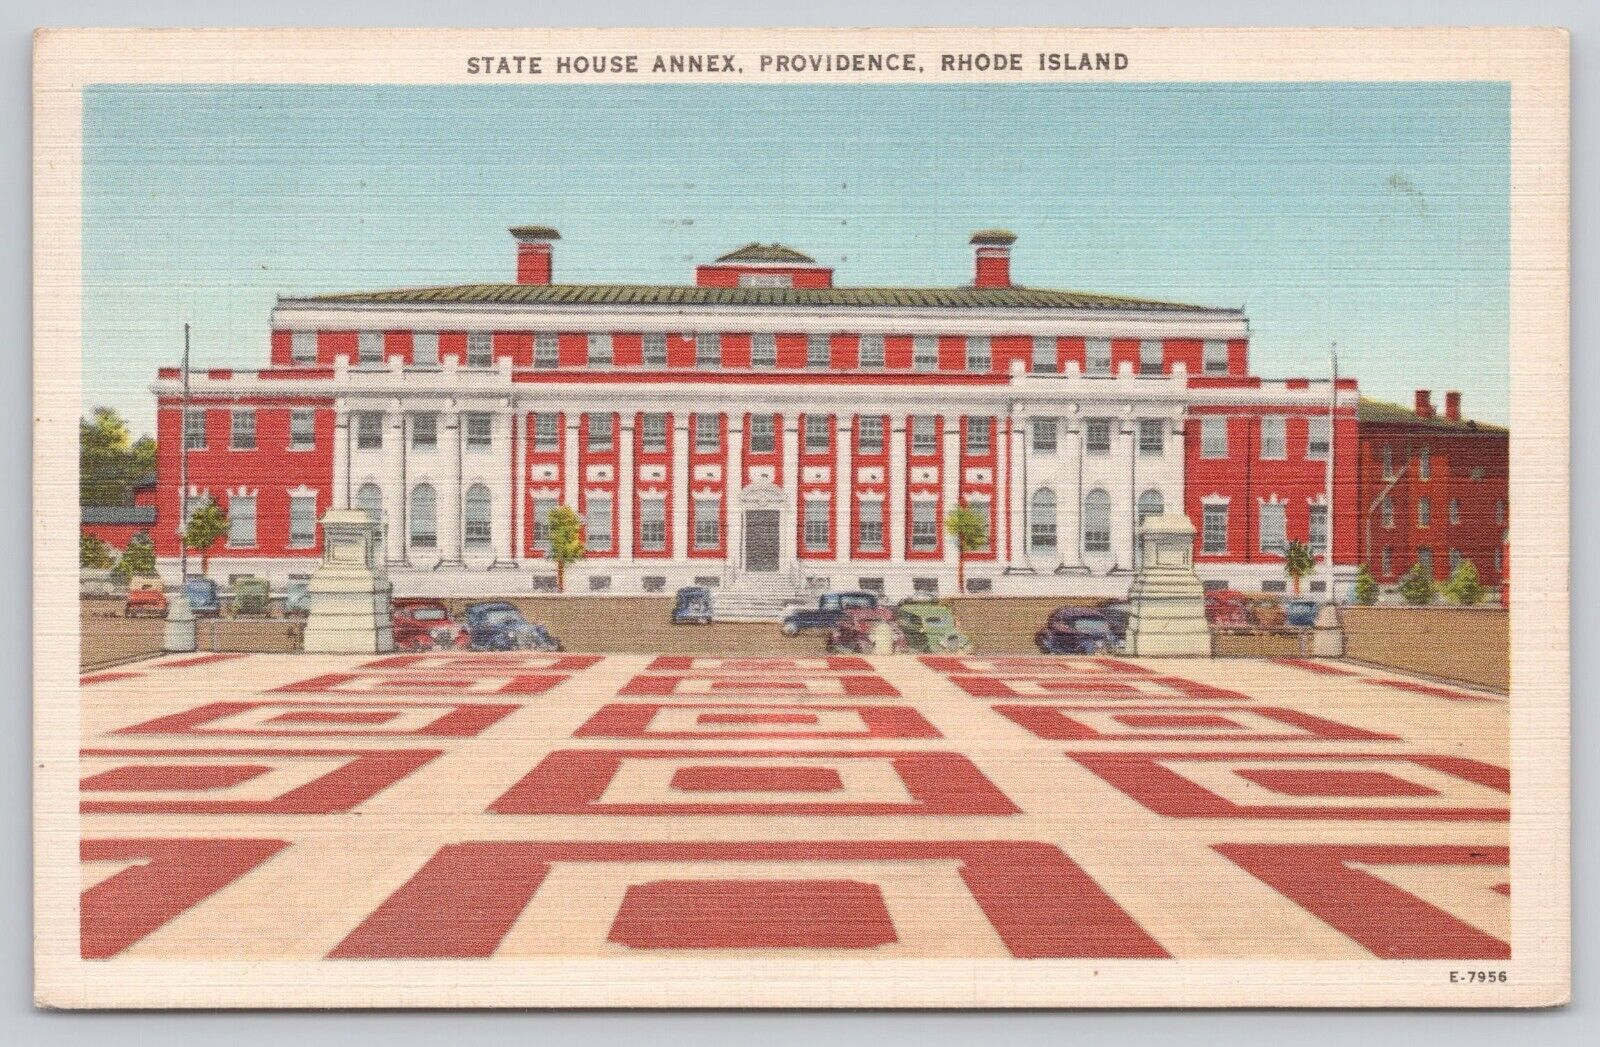 Providence Rhode Island RI - State House Annex Building Posted 1948 Postcard